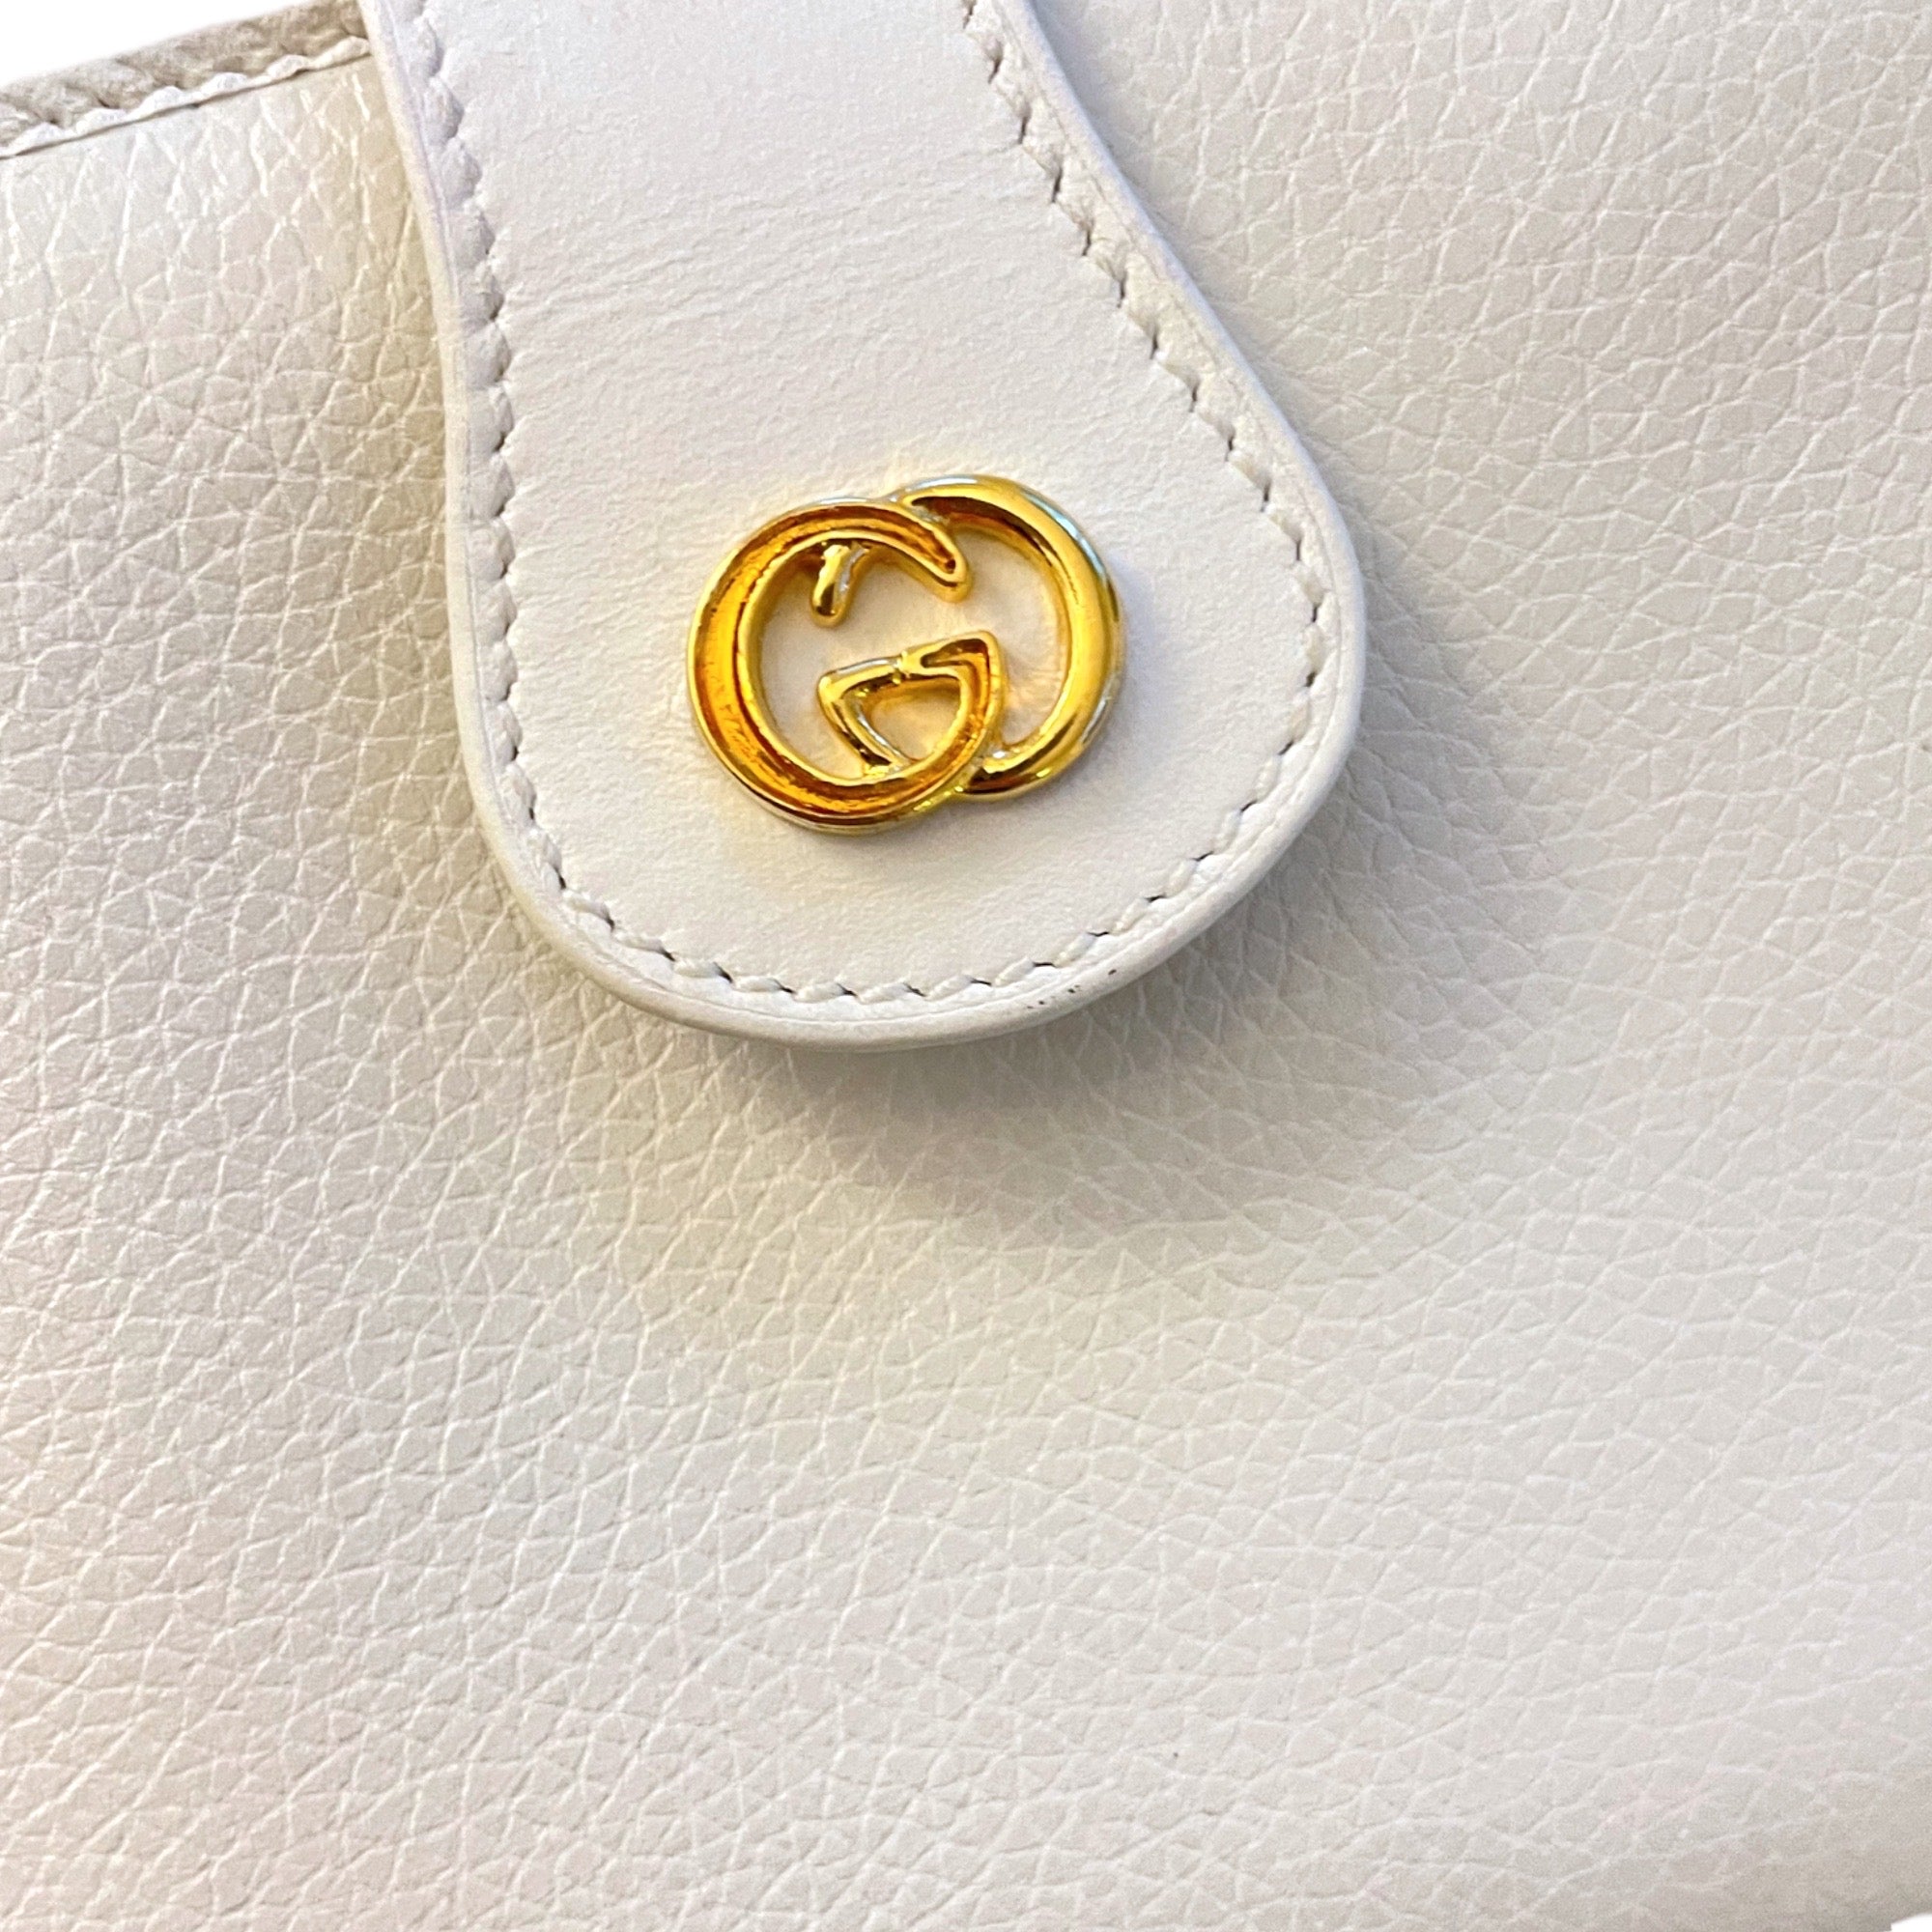 GUCCI Vintage Long White leather Wallet with Kiss Lock Coin Purse